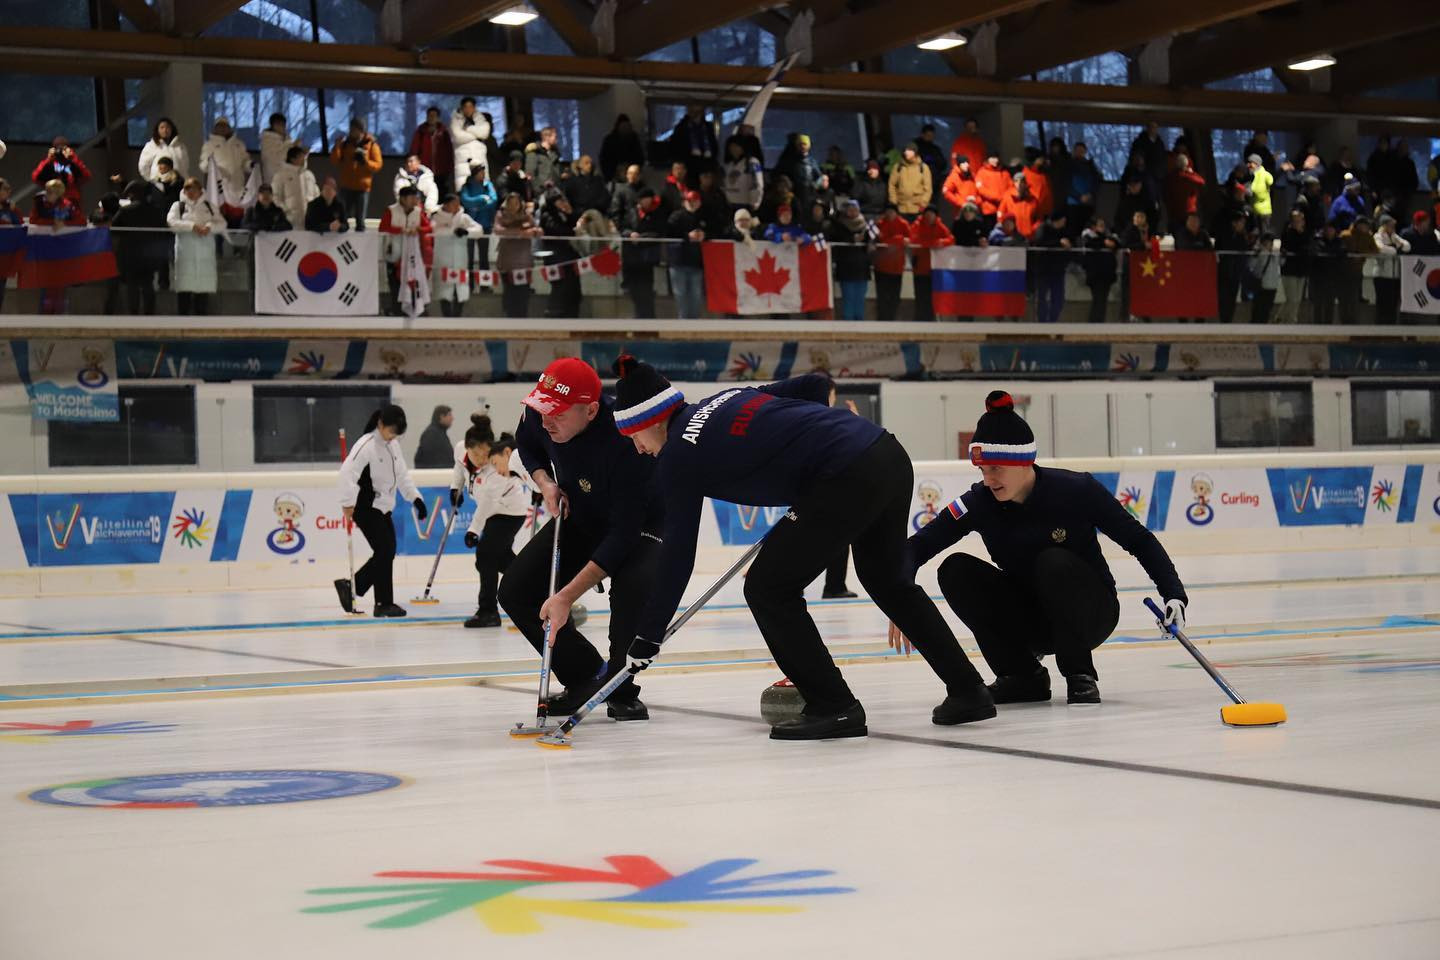 Russia and China through to men's and women's curling finals at Winter Deaflympics